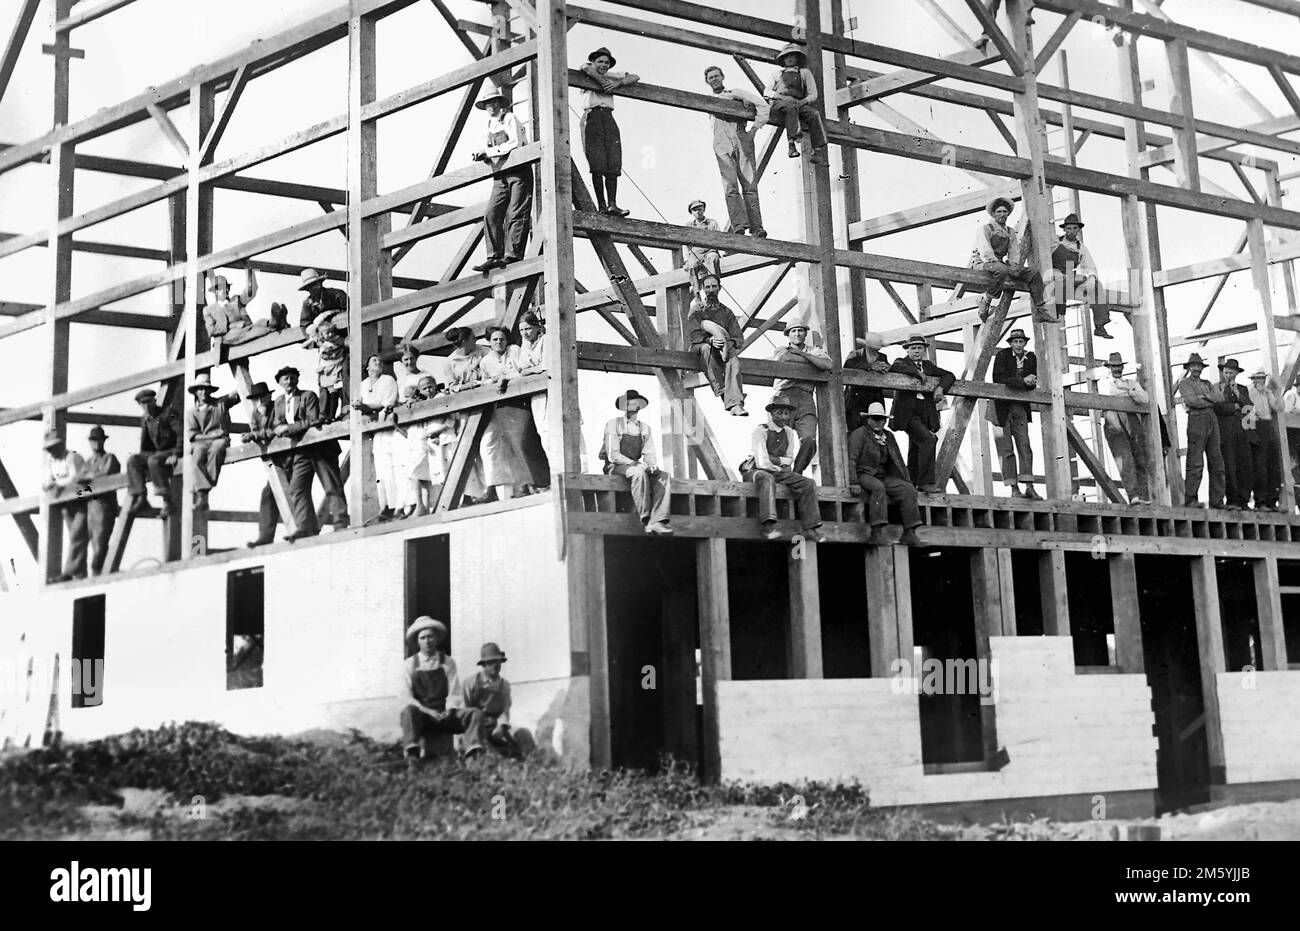 Area farmers come together to build a barn in Wisconsin, ca. 1910. Stock Photo